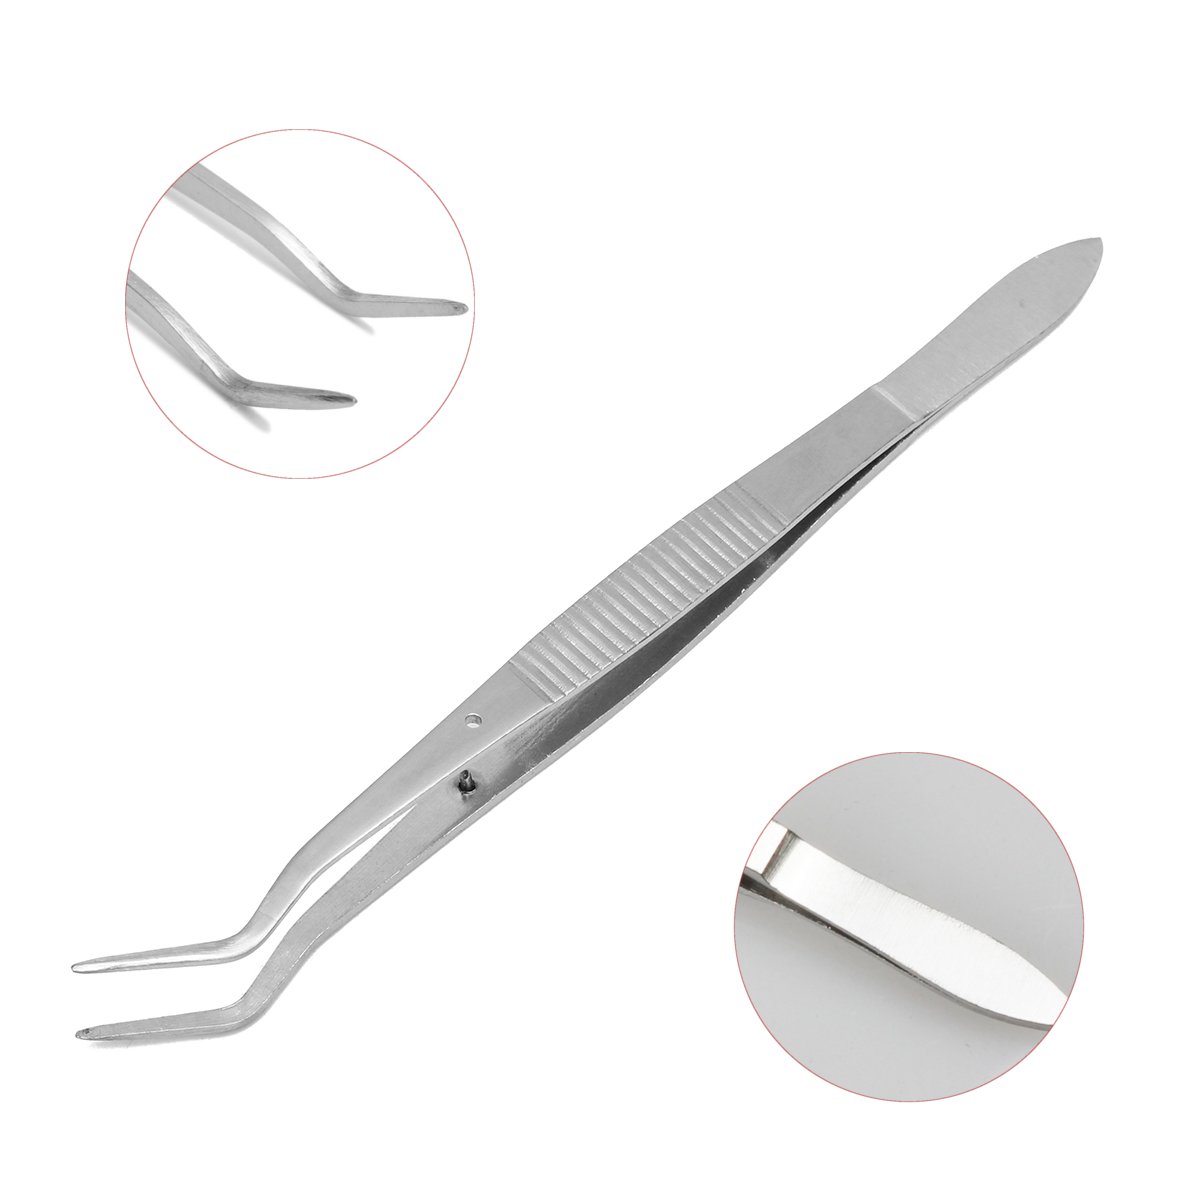 10Pcs-6inch-Stainless-Steel-Dental-Tweezers-Surgical-Lab-Instruments-Dentistry-Tool-1141171